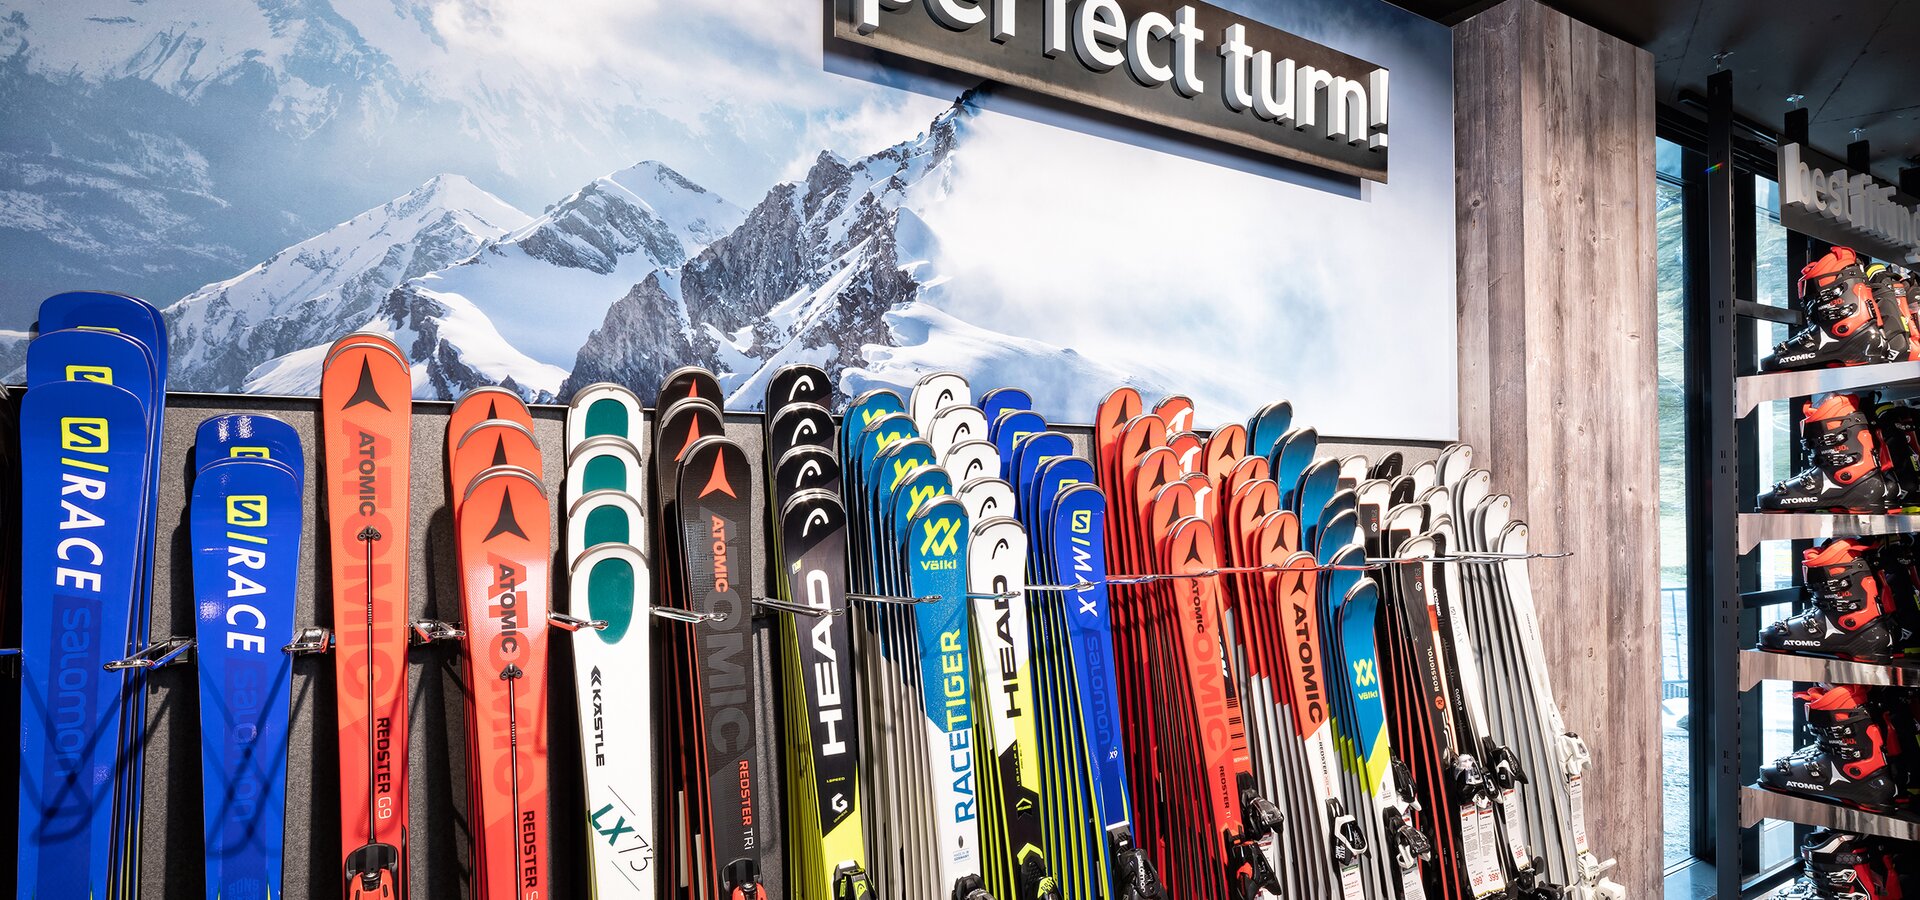  In Kaprun, you will find a wide selection of sports shops and ski-rental businesses with expert staff | © Kitzsteinhorn